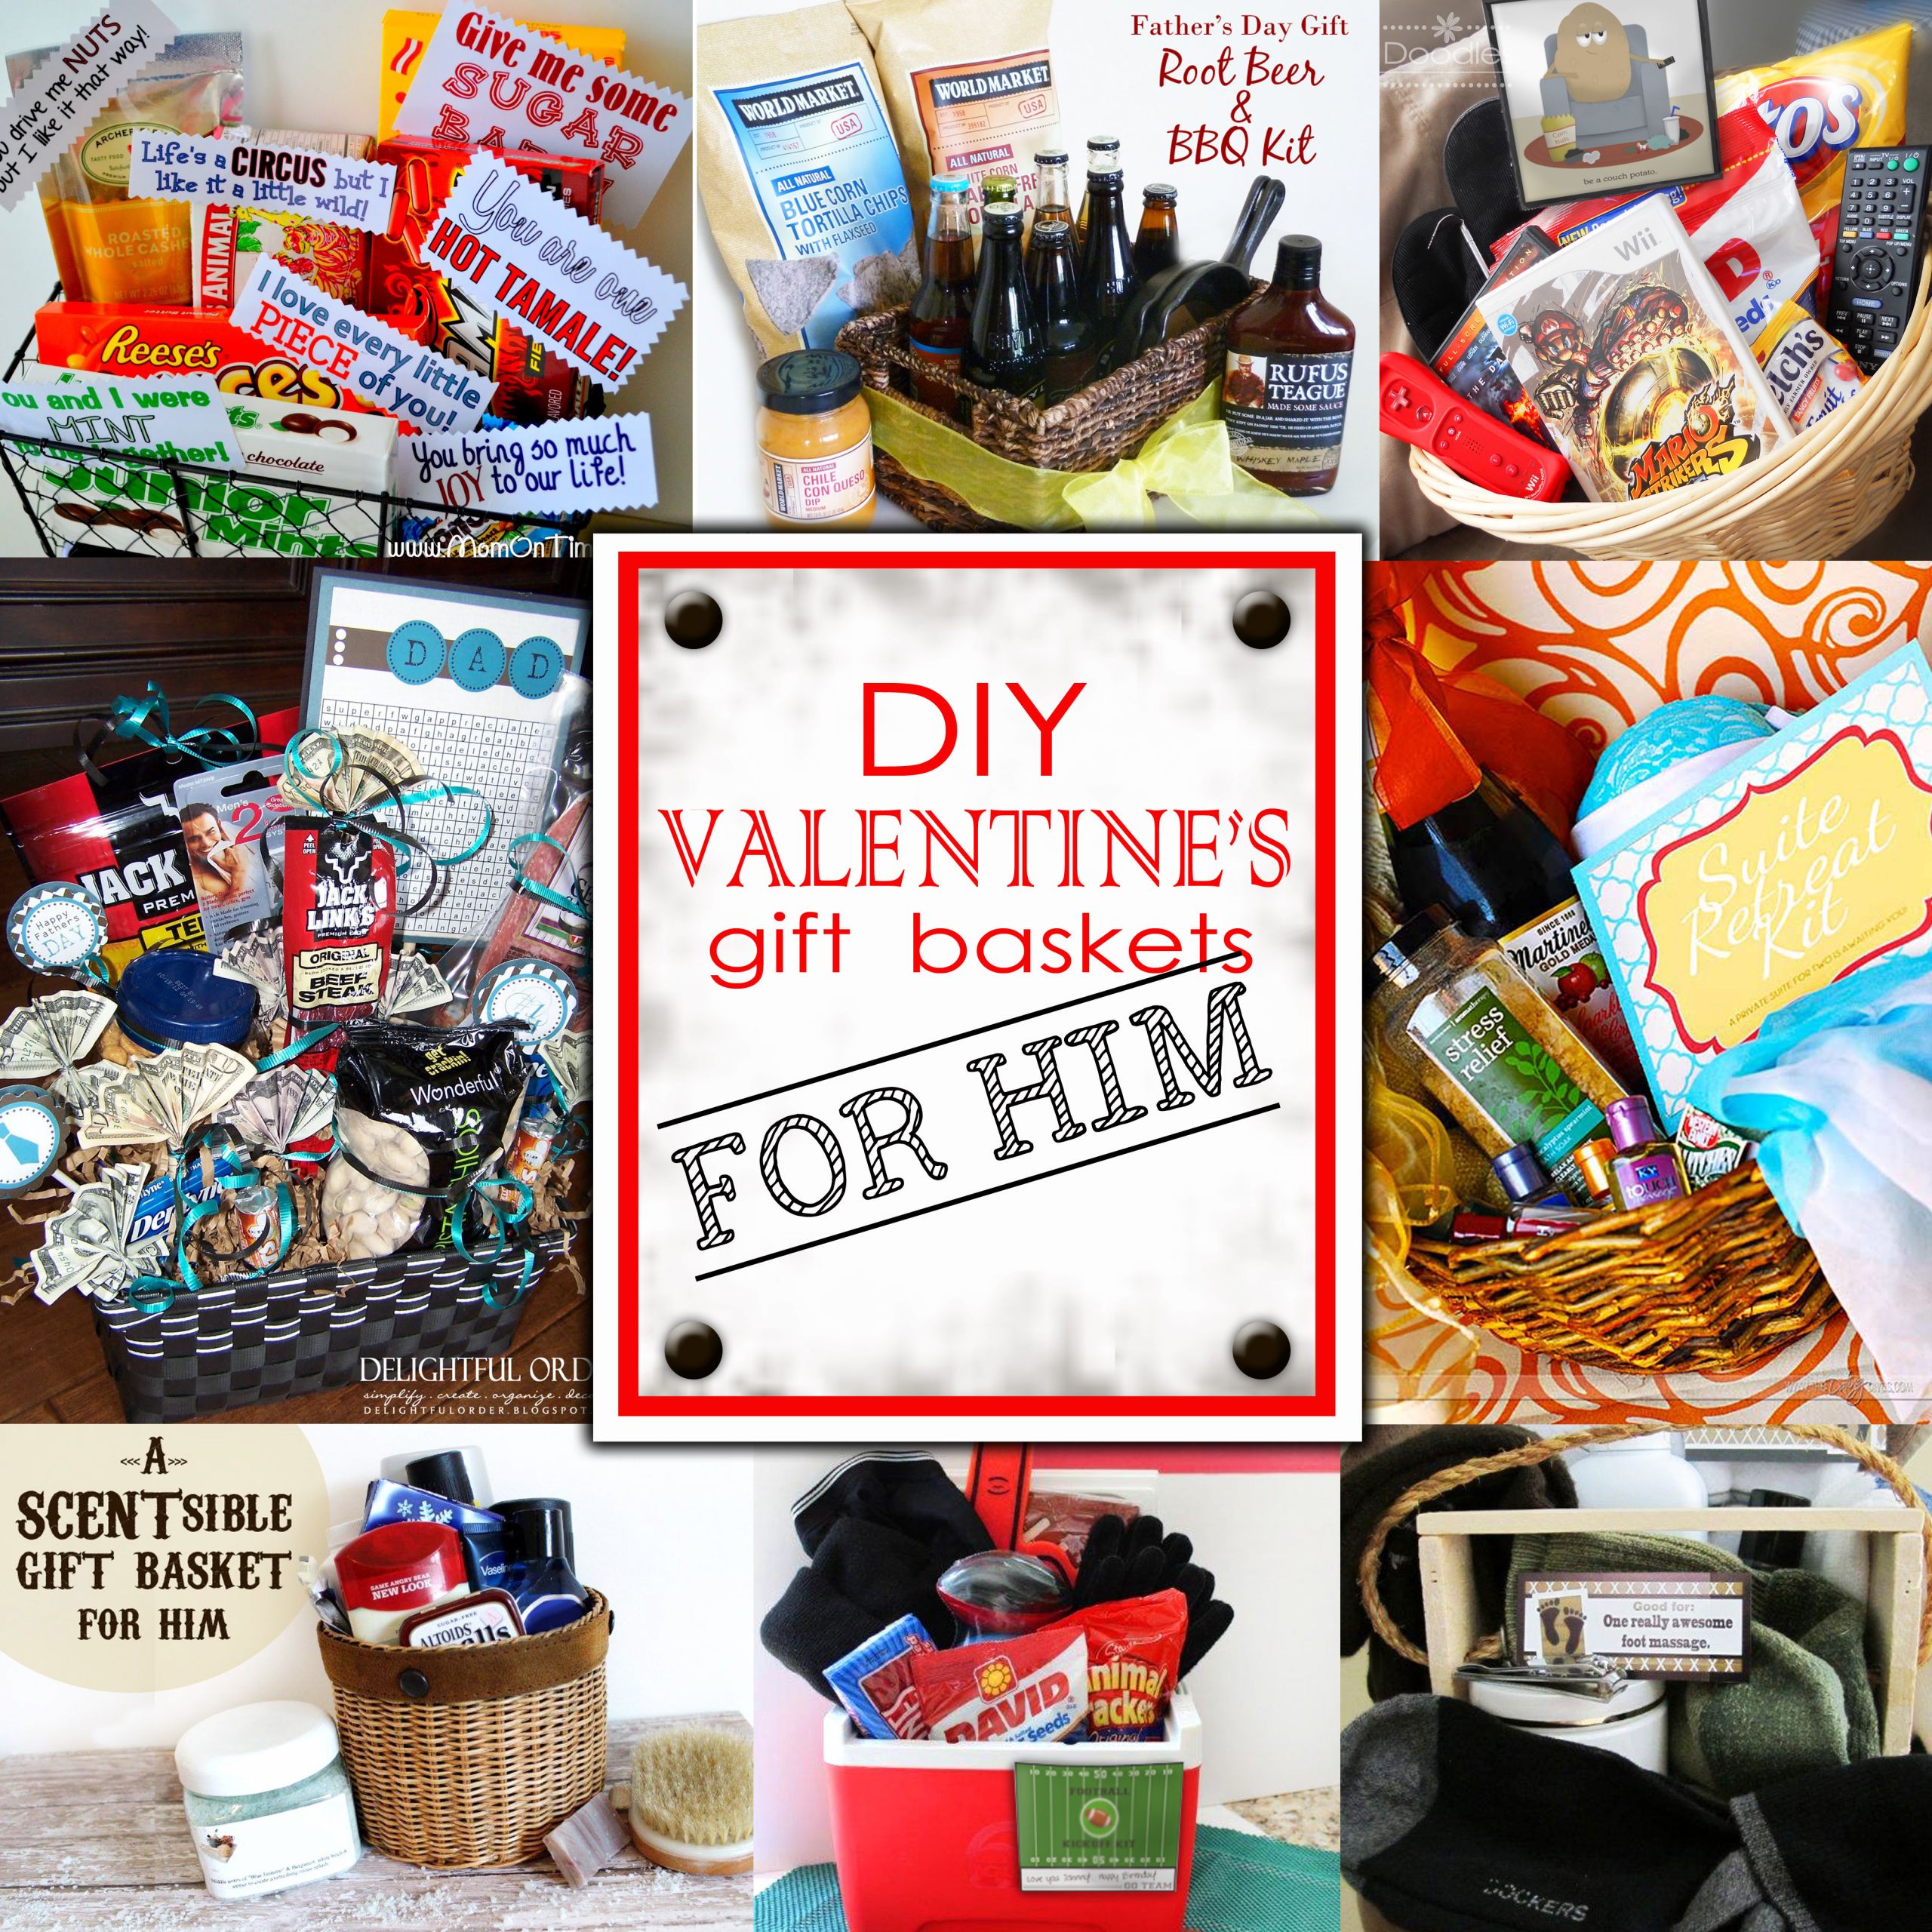 Valentines Day Gifts for Him Luxury Diy Valentine S Day Gift Baskets for Him Darling Doodles